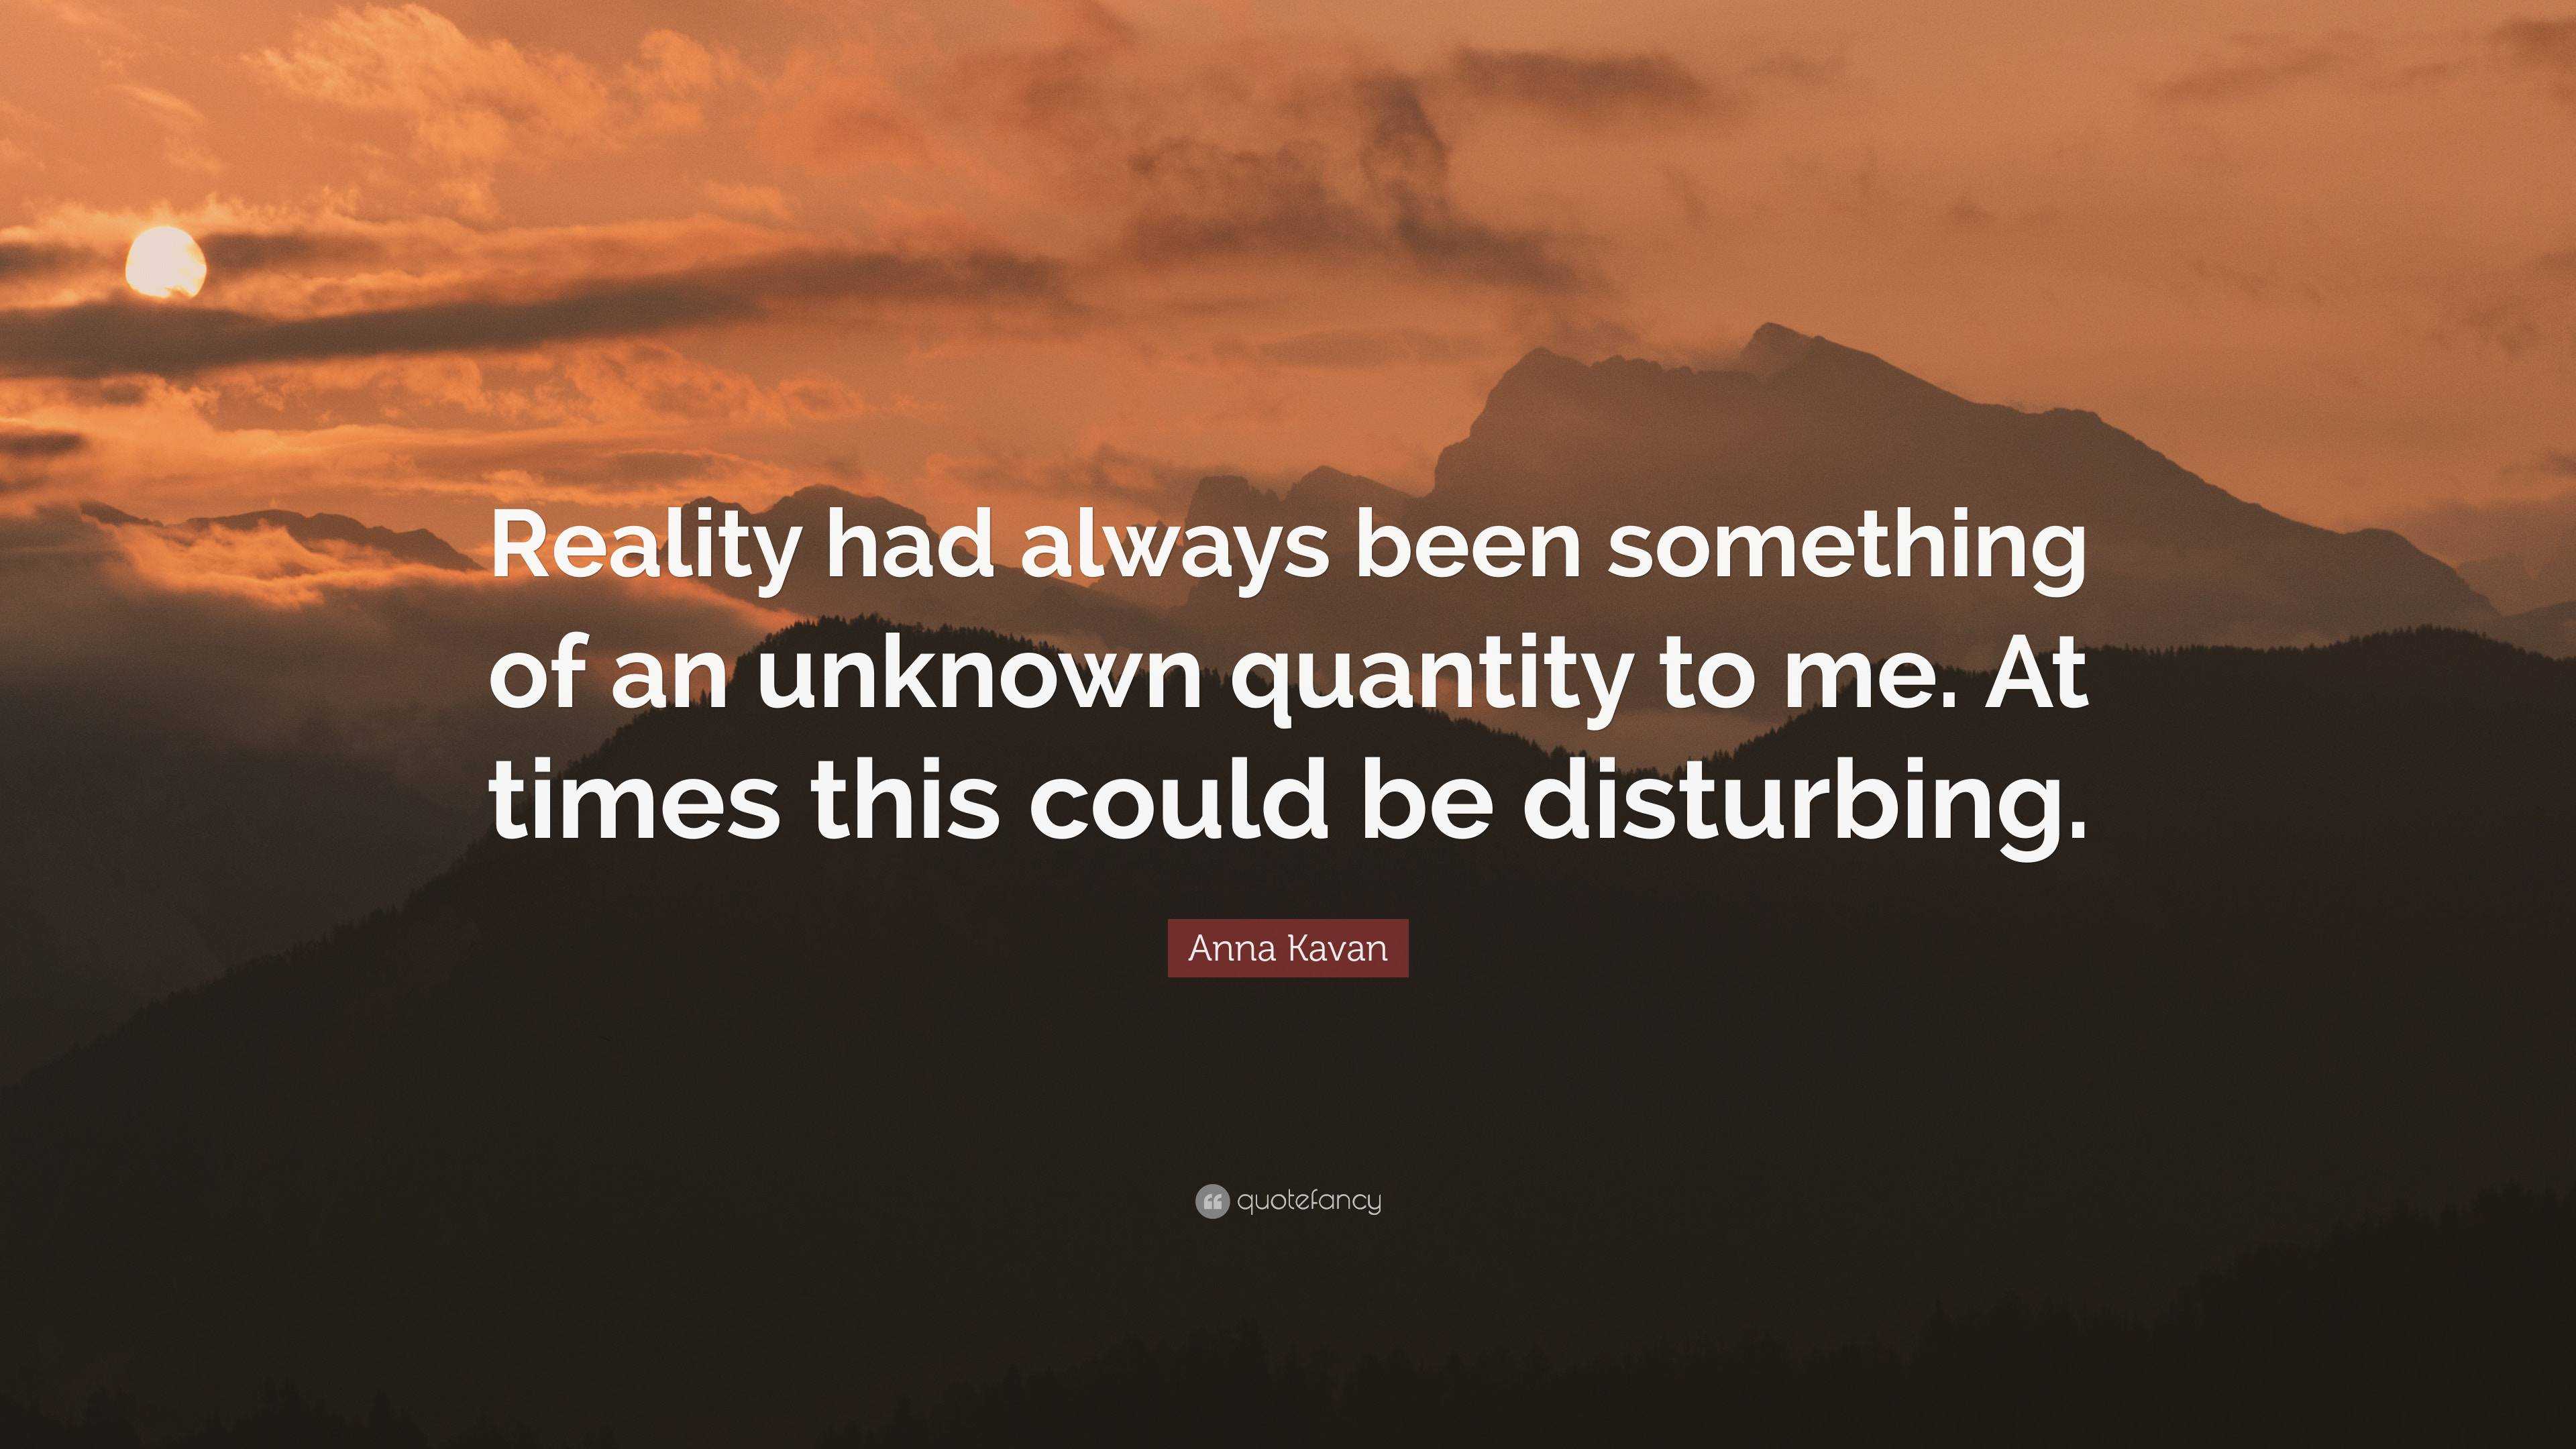 Anna Kavan Quote: “Reality had always been something of an unknown ...